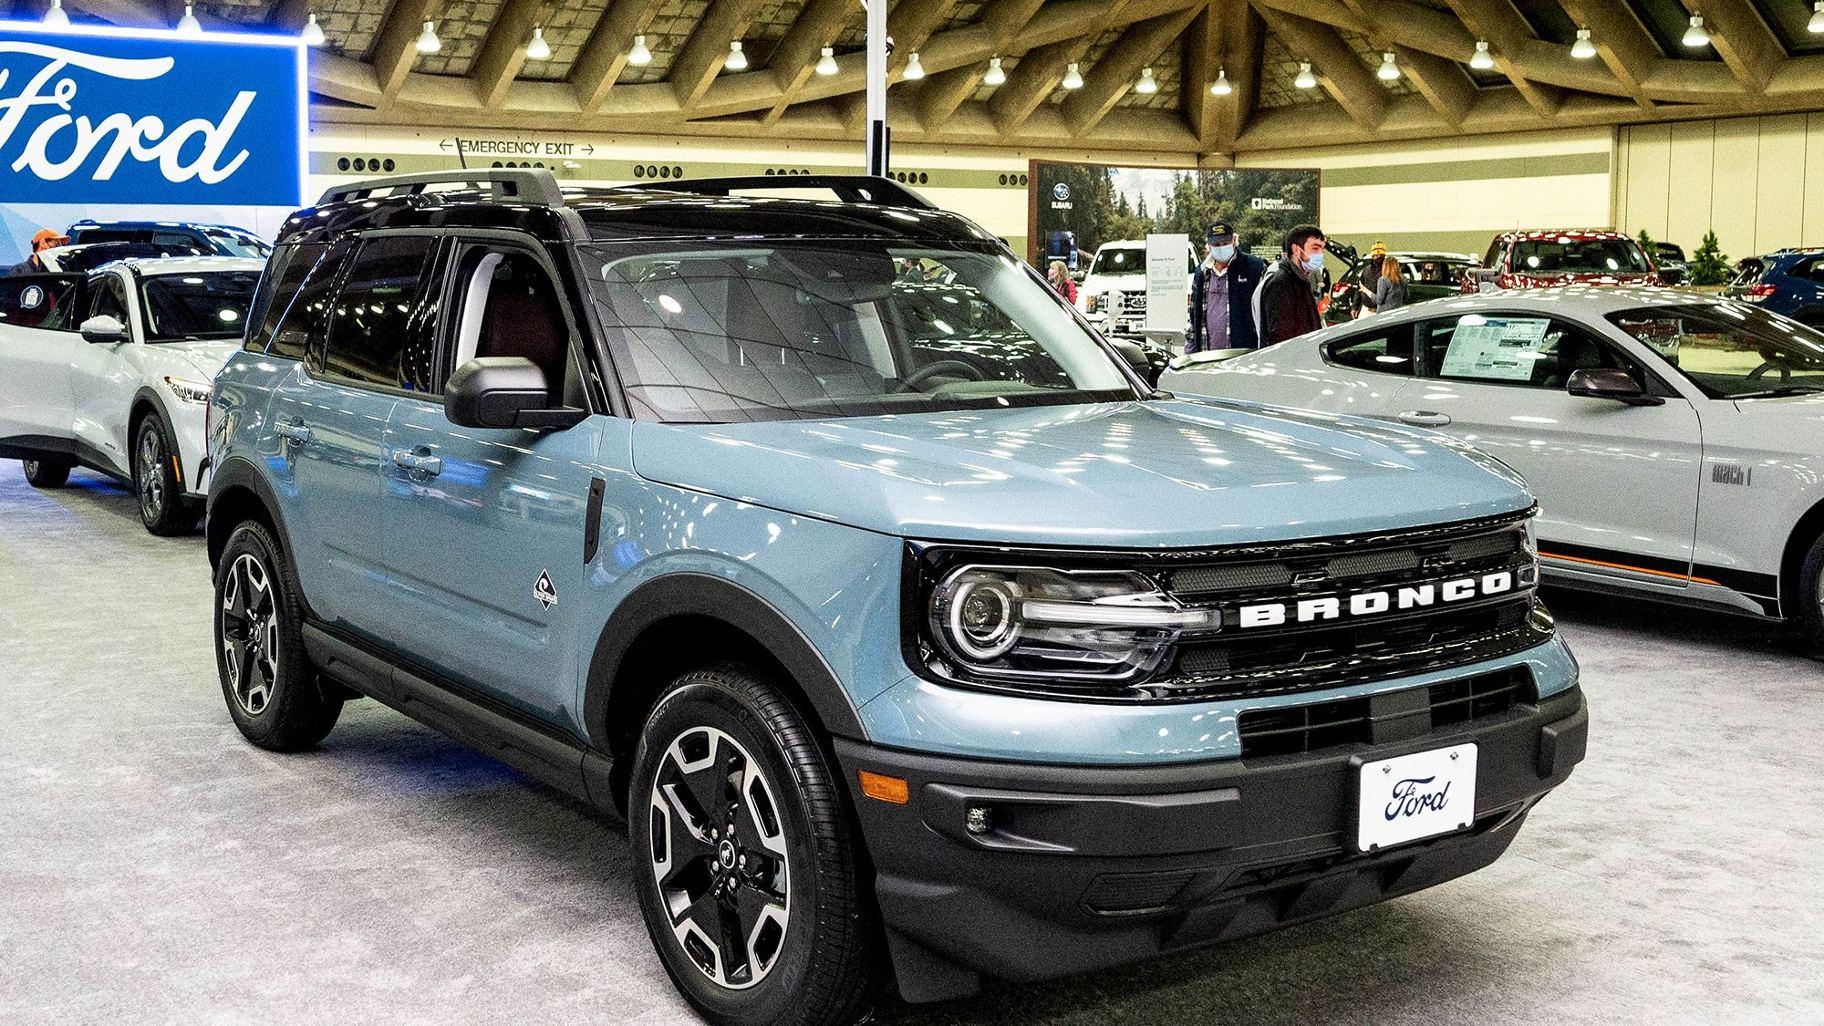 A 2022 Ford Bronco Sport is displayed at the 2022 Maryland Auto Show. (Michael Brochstein / SOPA Images / Shutterstock via CNN Newsource)